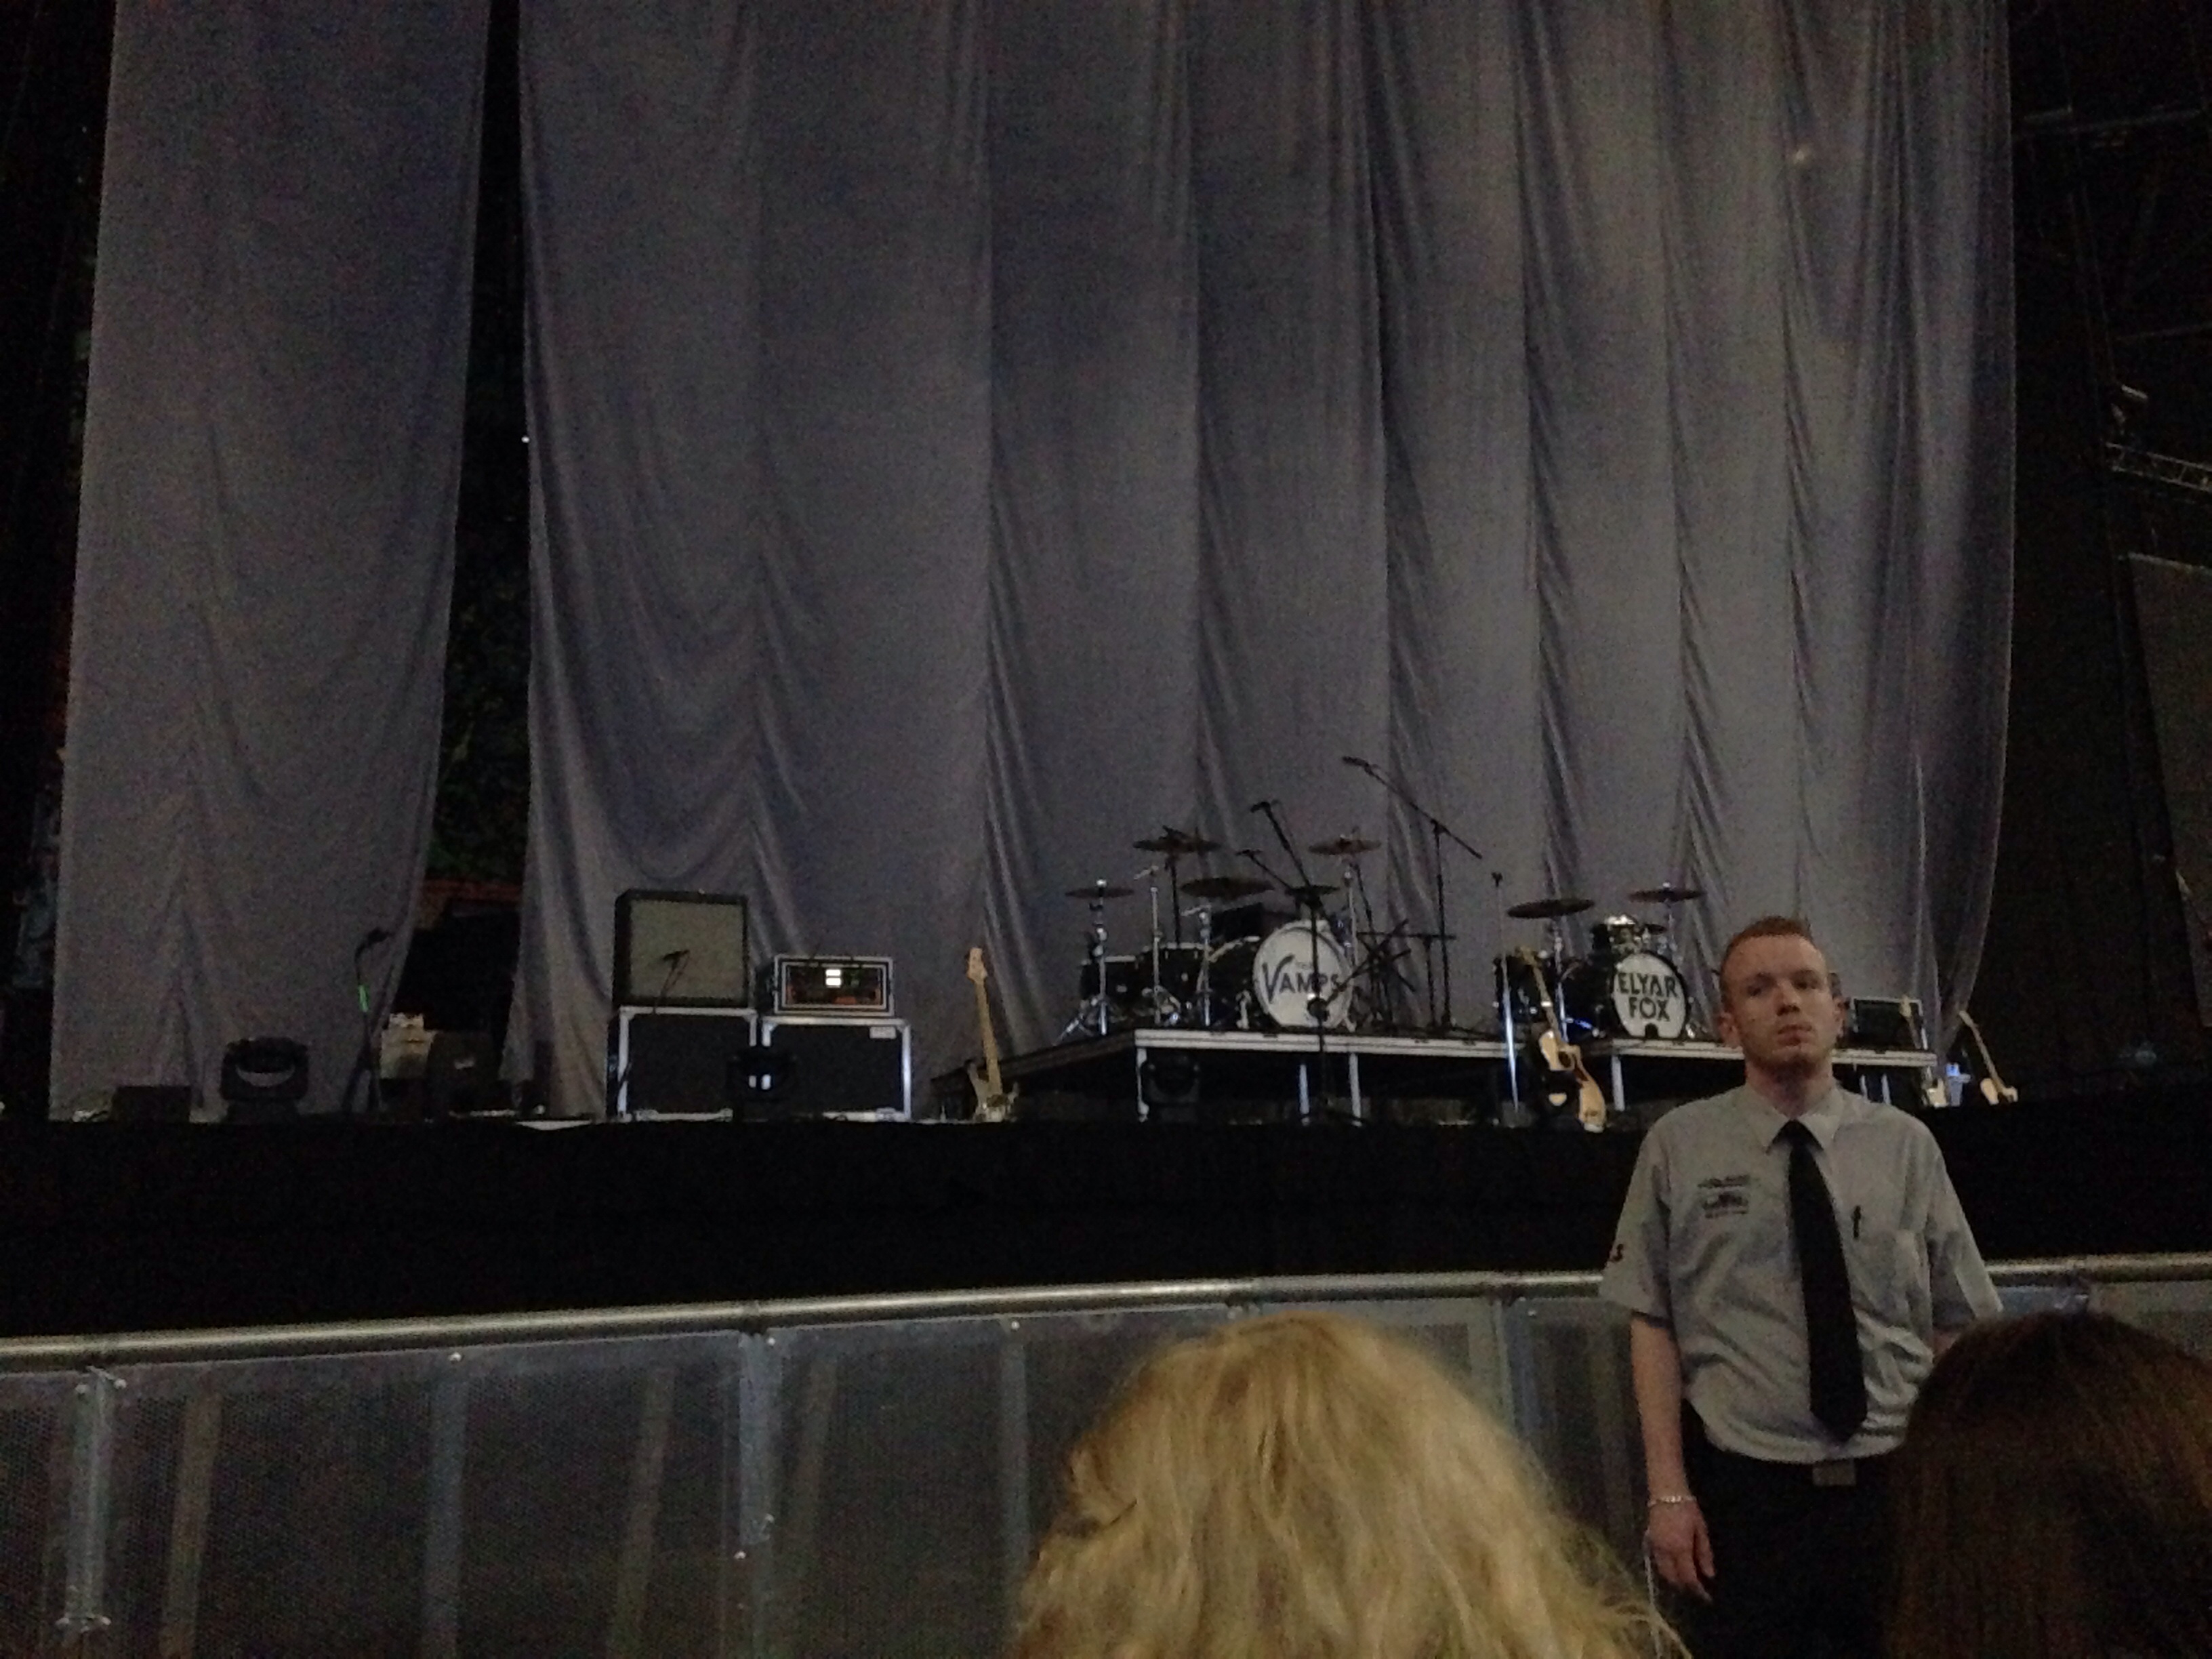 View from SSE Hydro (Glasgow) Block 004 Row B Seat 69